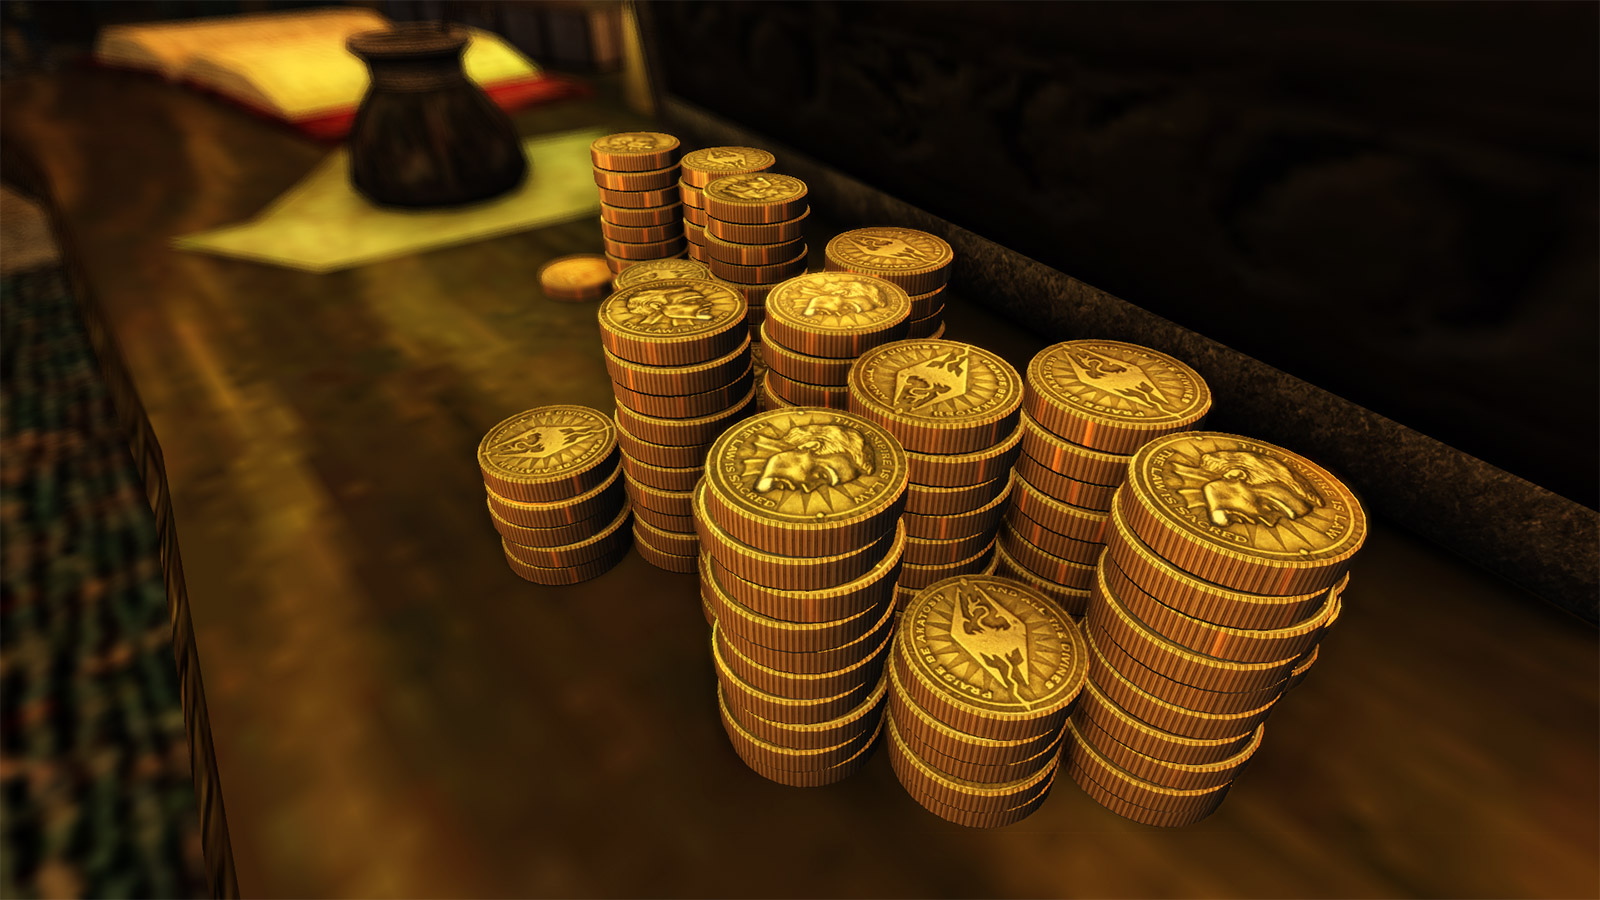 Investing money in shops skyrim console guide to investing in silver and gold